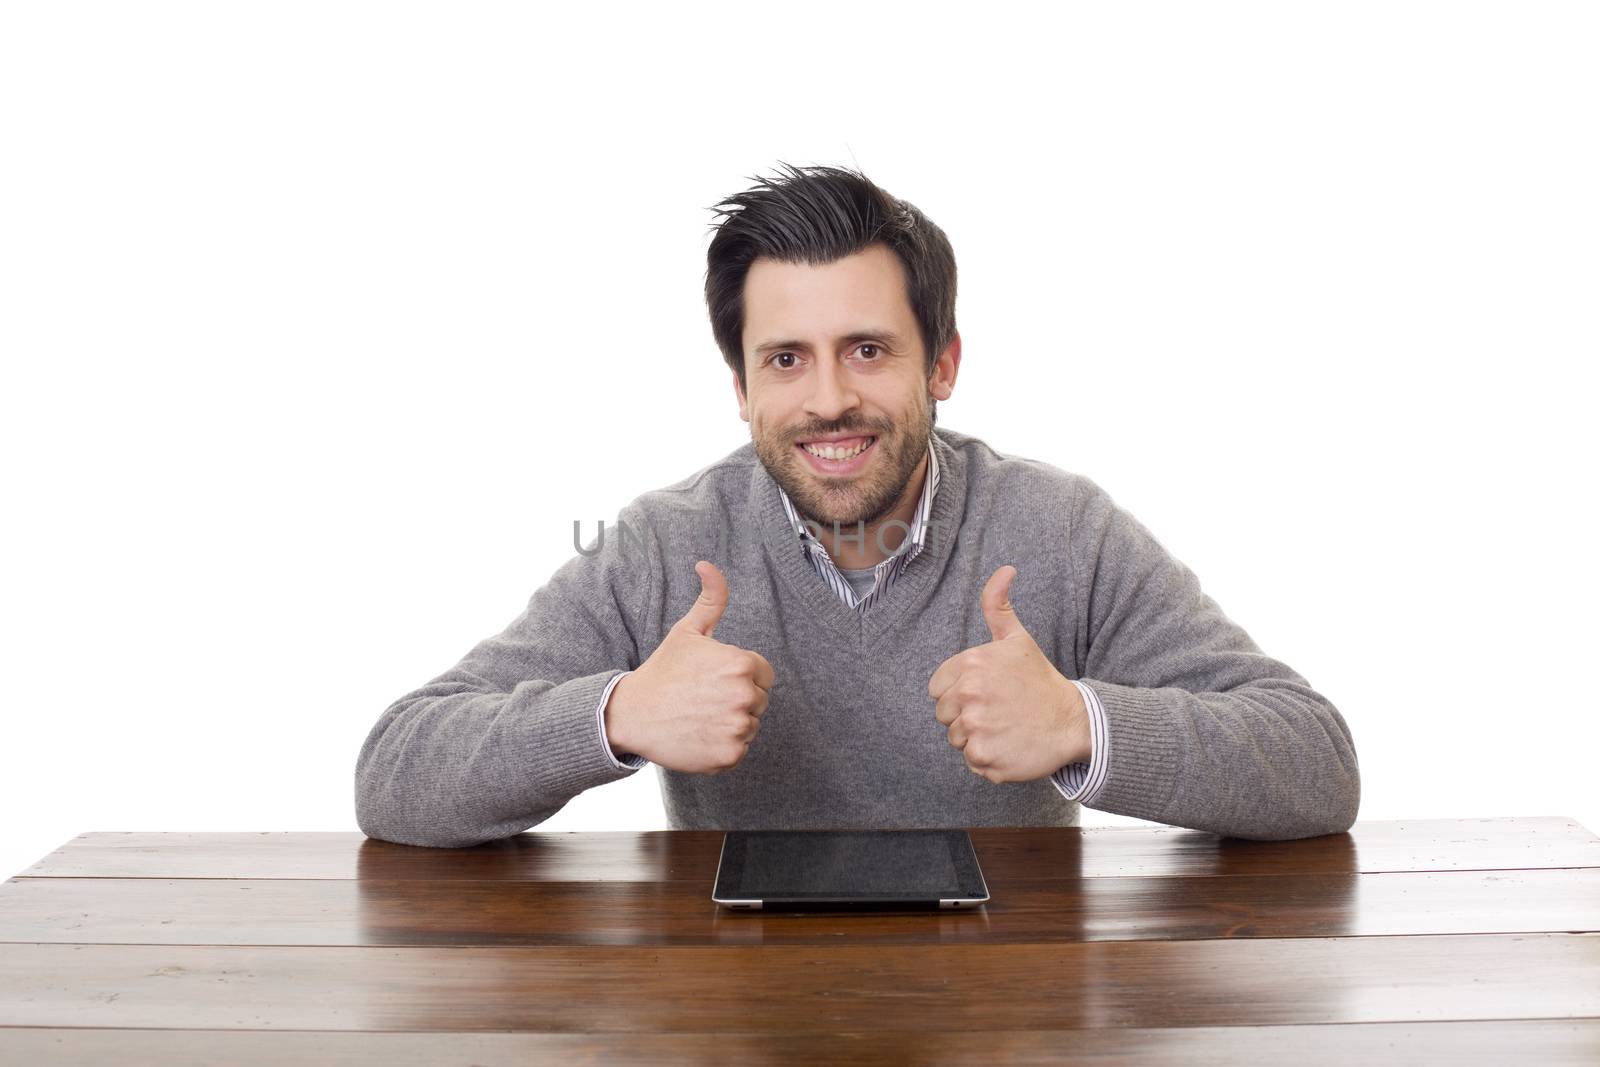 happy man on a desk with a tablet pc, isolated